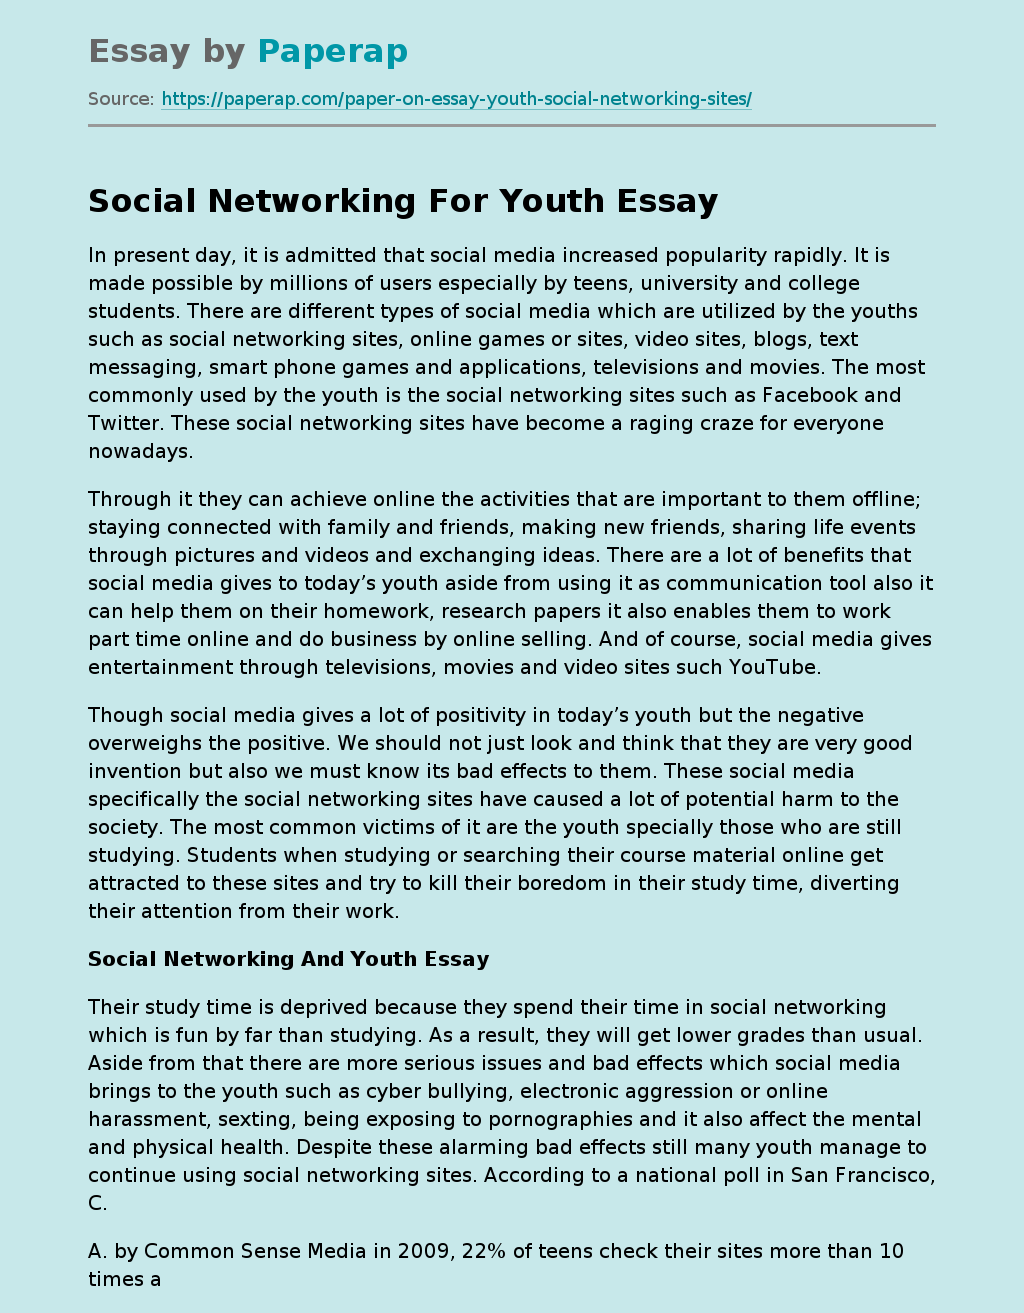 Social Networking For Youth